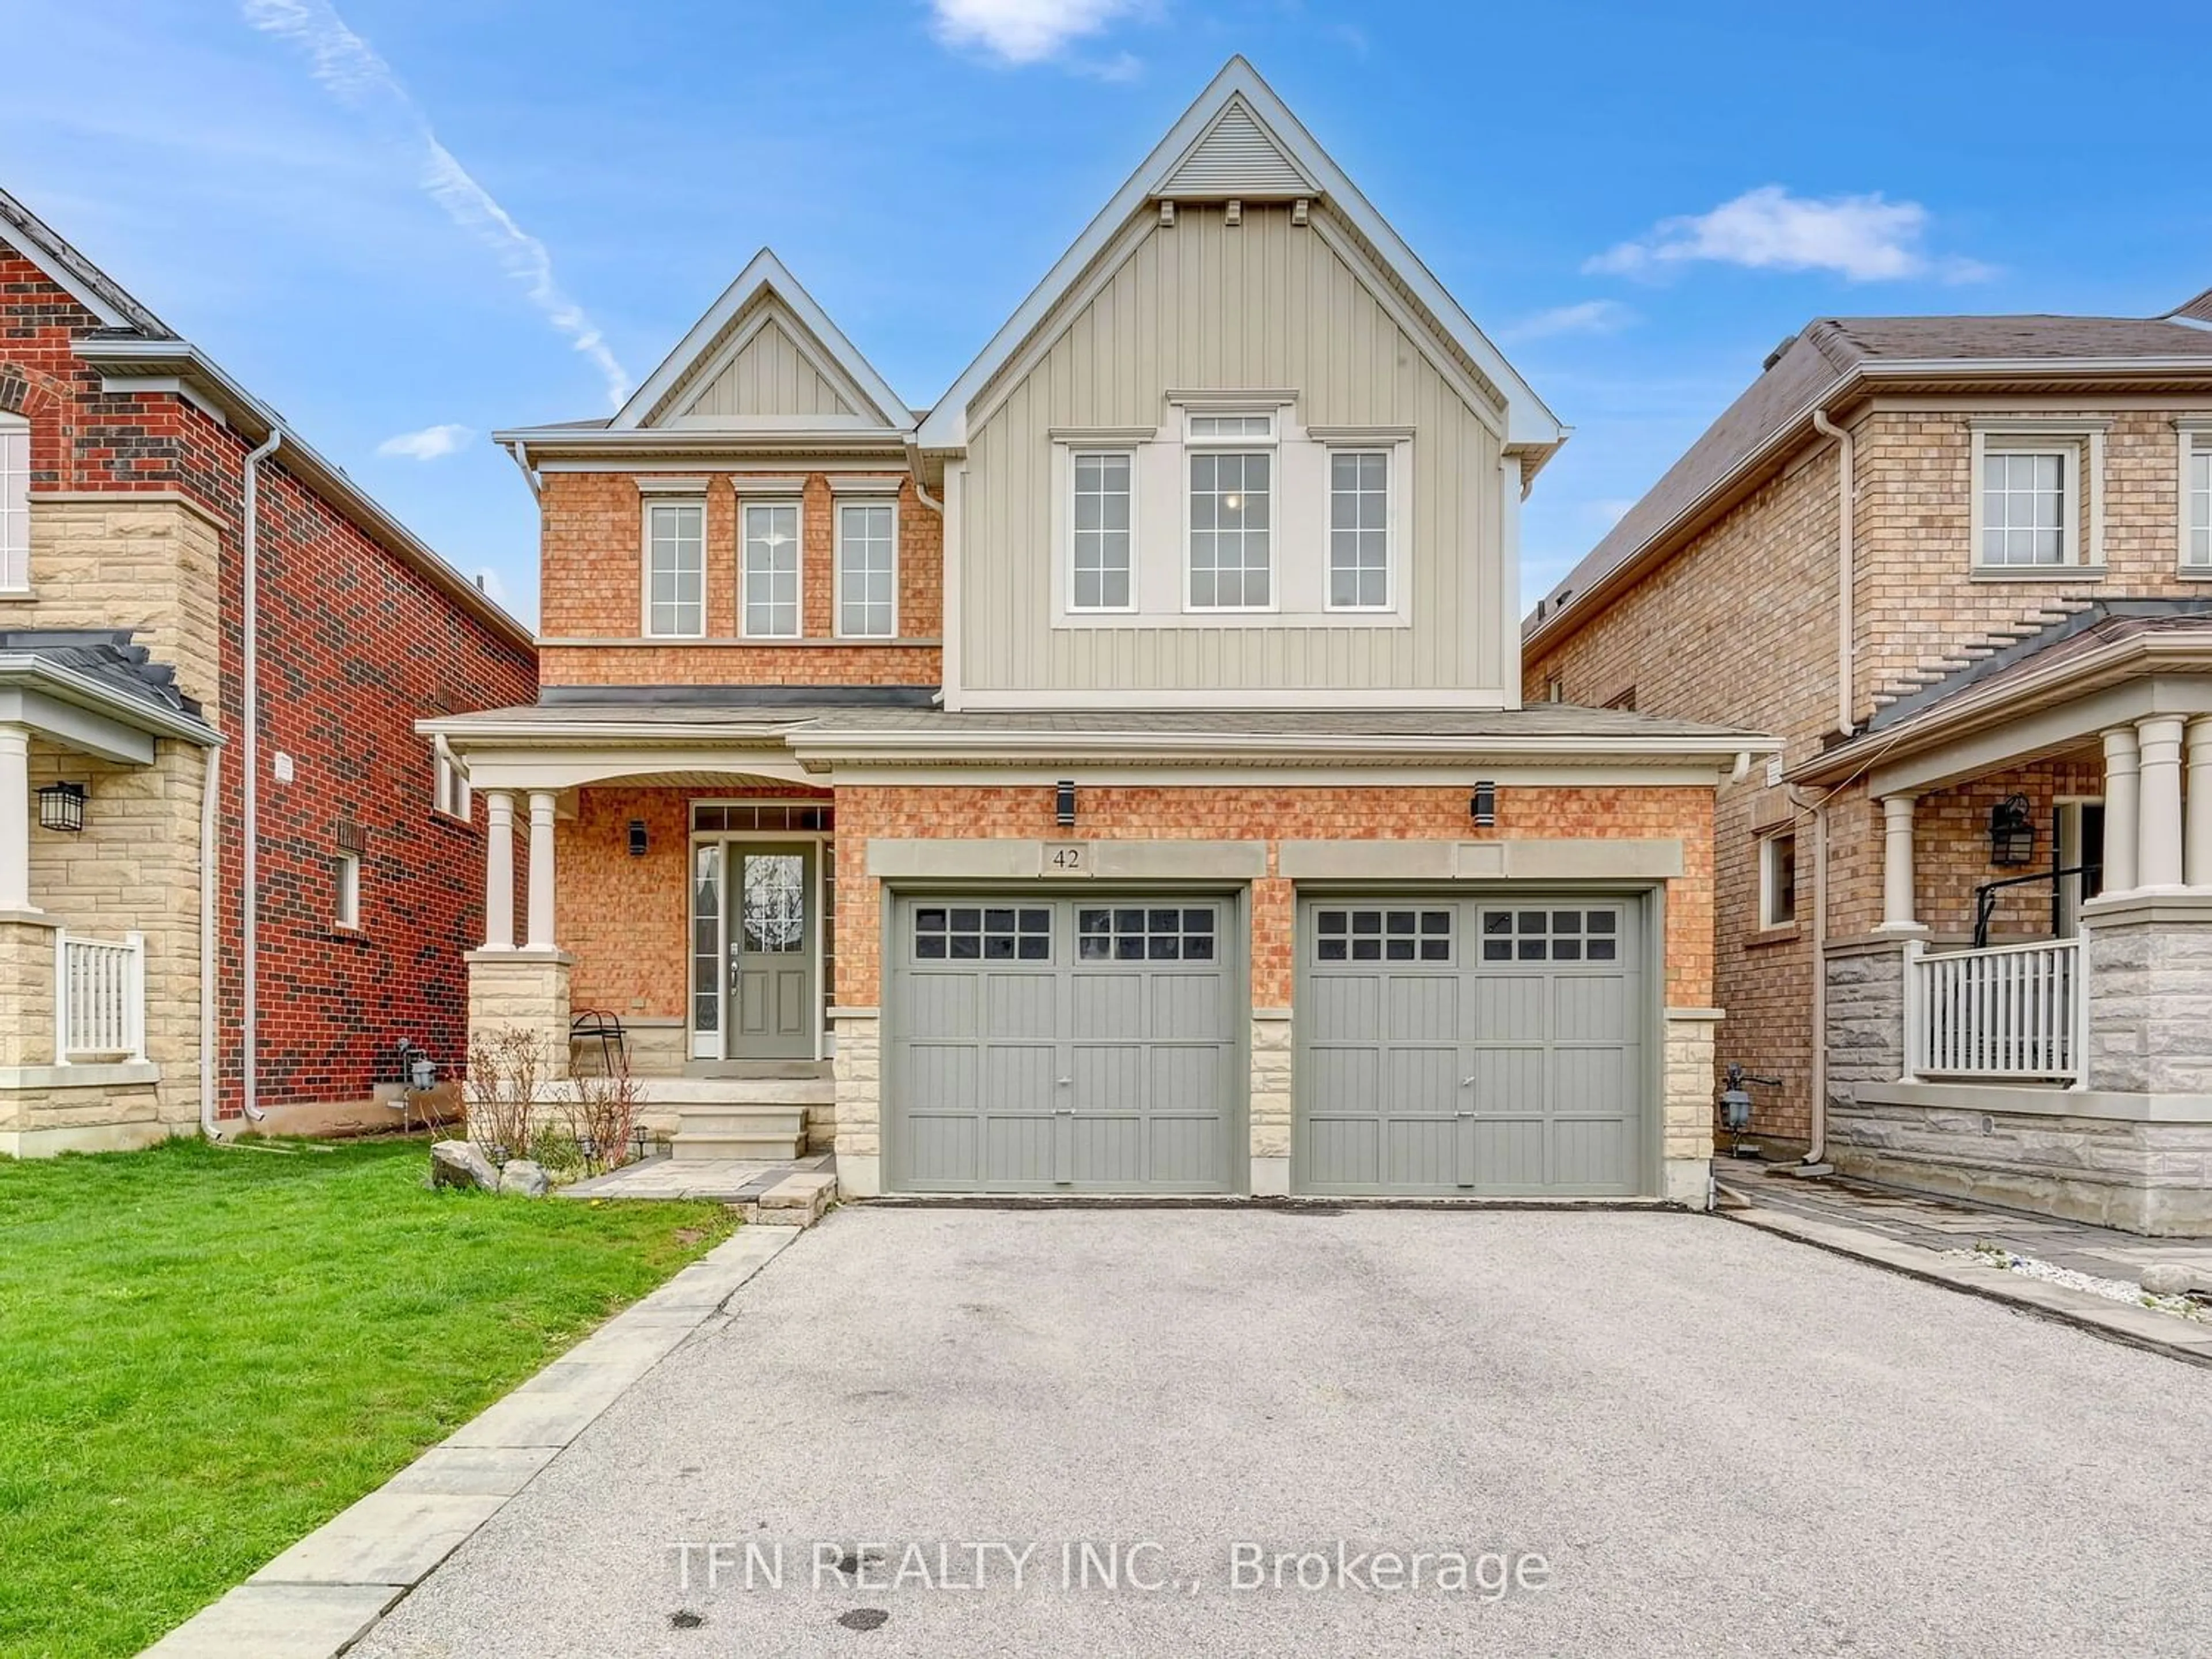 Home with brick exterior material for 42 Corwin Dr, Bradford West Gwillimbury Ontario L3Z 0J2